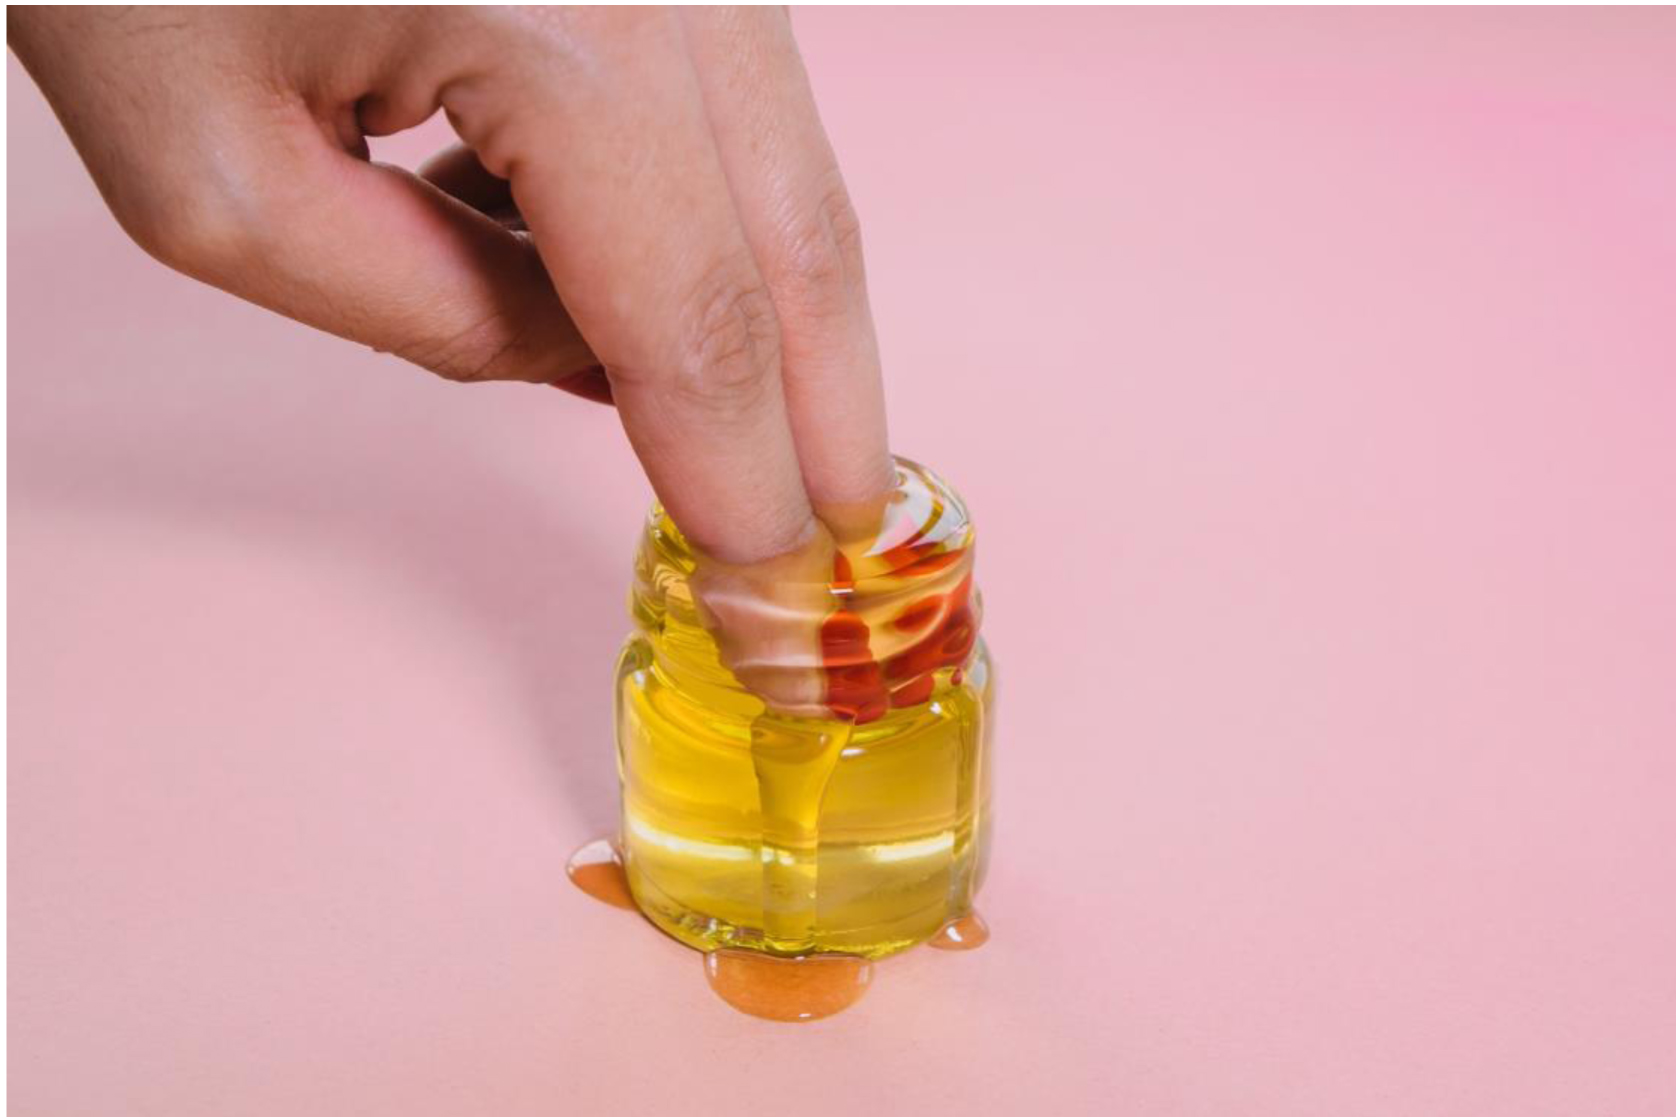 A hand holding a small bottle of honey on a pink background featuring genital tunes.